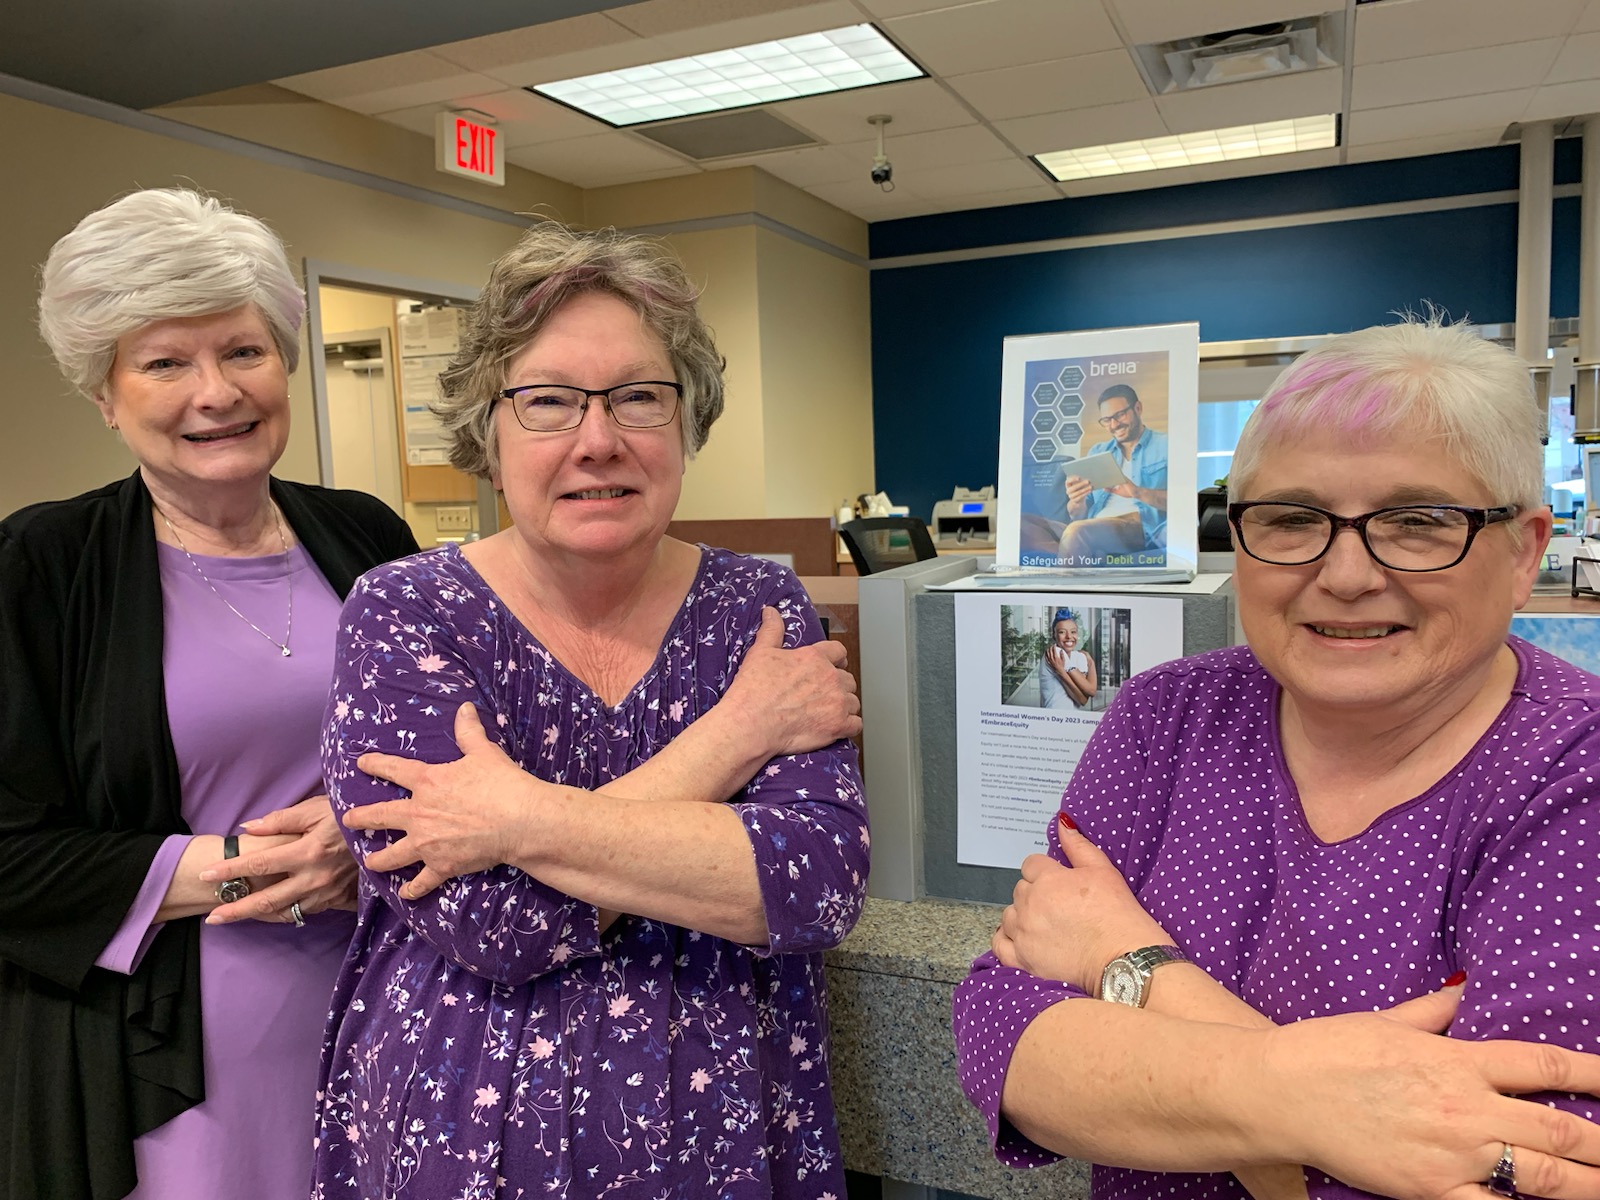 Three women in purple standing together.